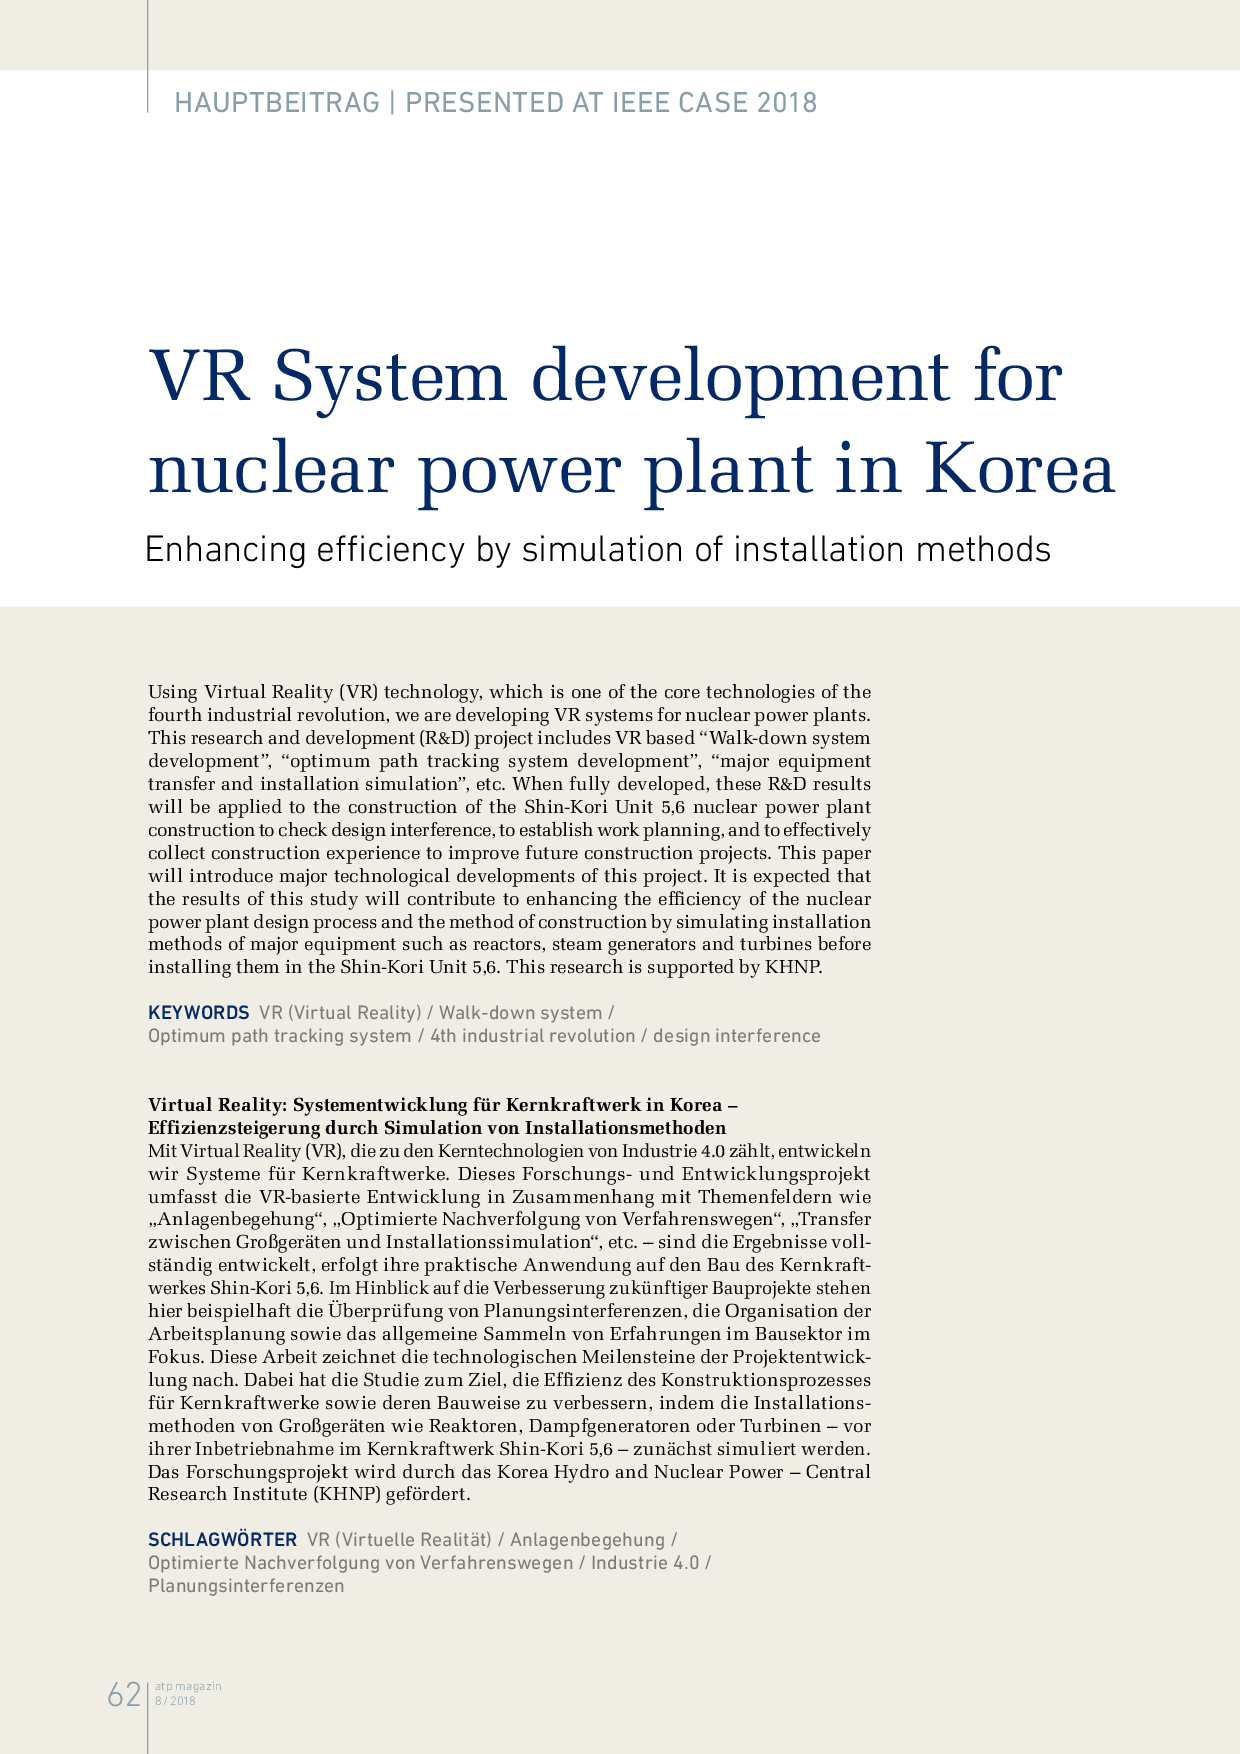 VR System development for nuclear power plant in Korea